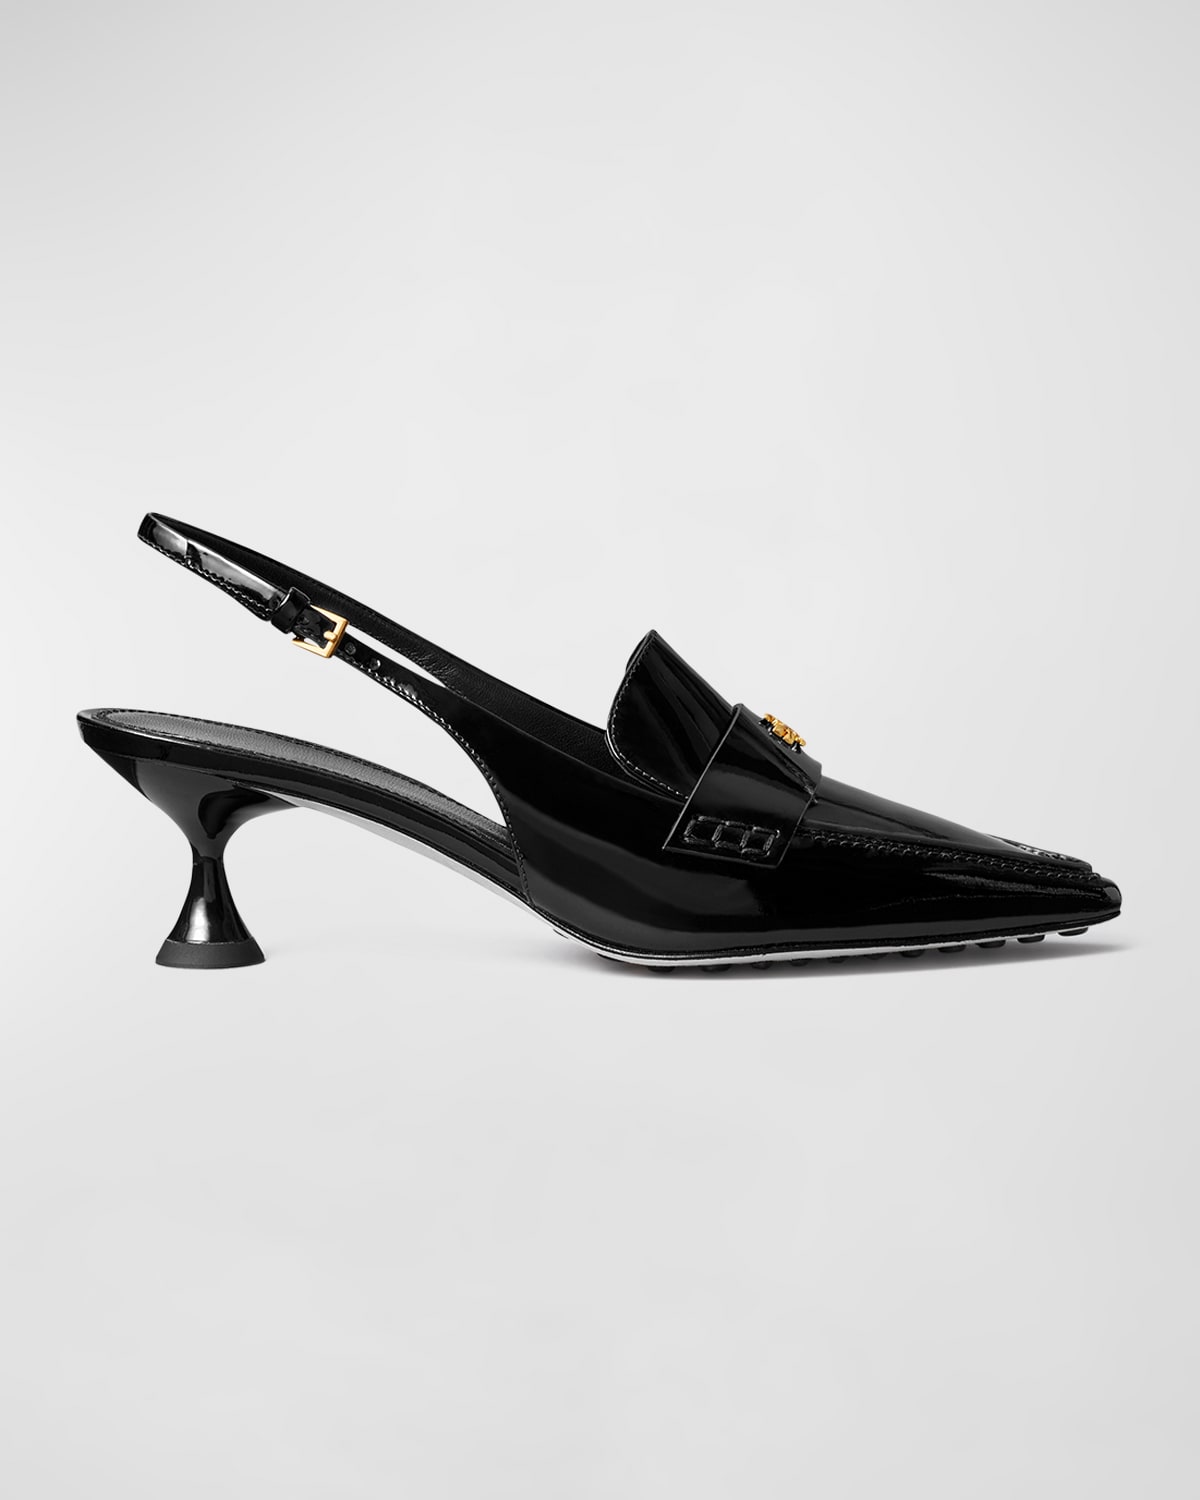 TORY BURCH POINTED SLINGBACK PUMPS